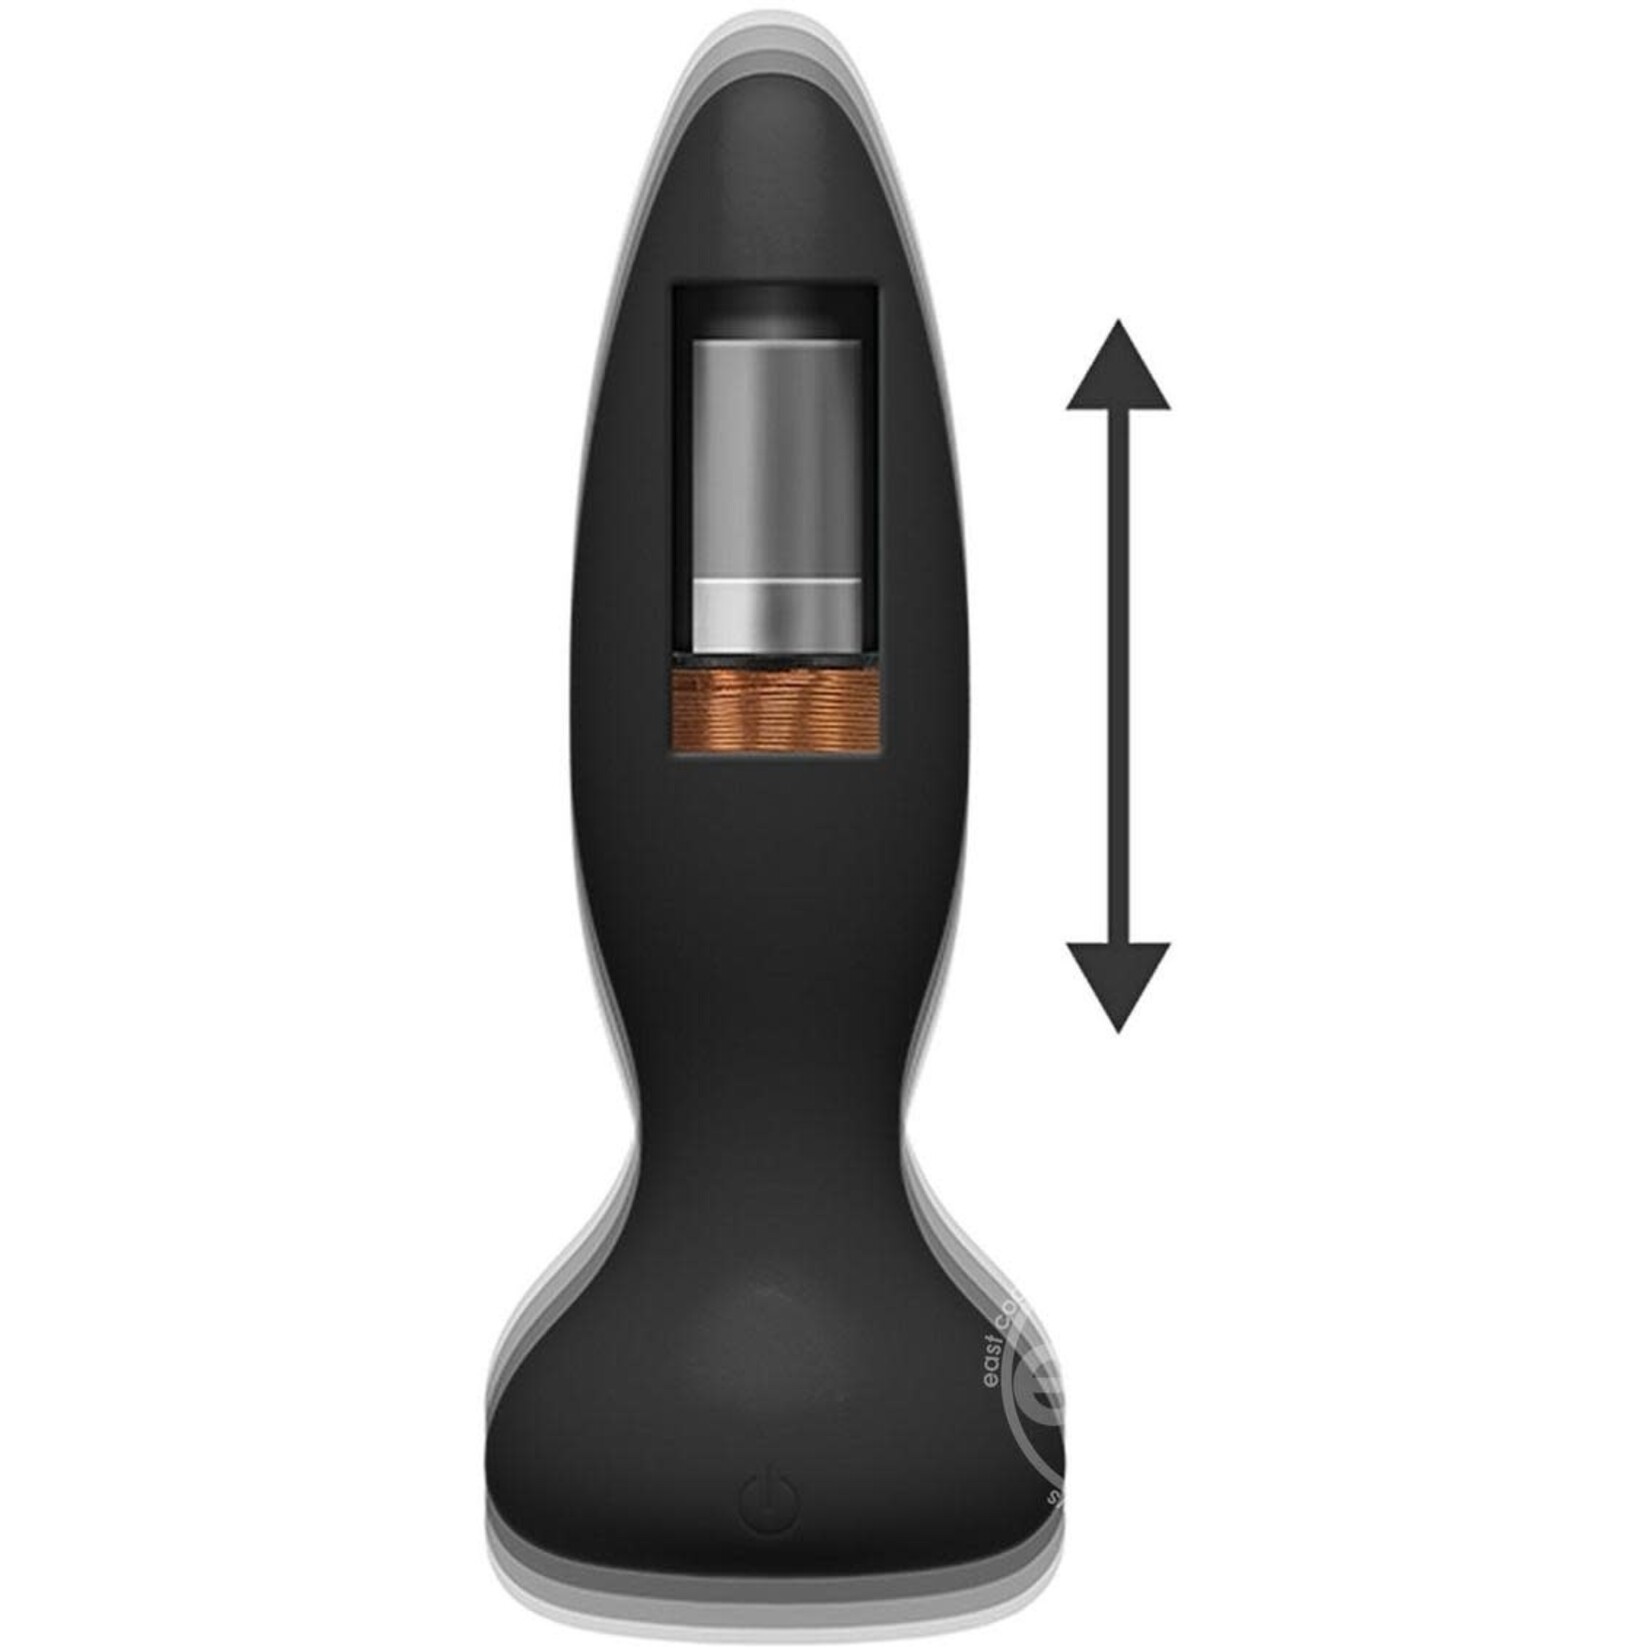 A-play Thrust Experienced Anal Plug With Remote Control - Black